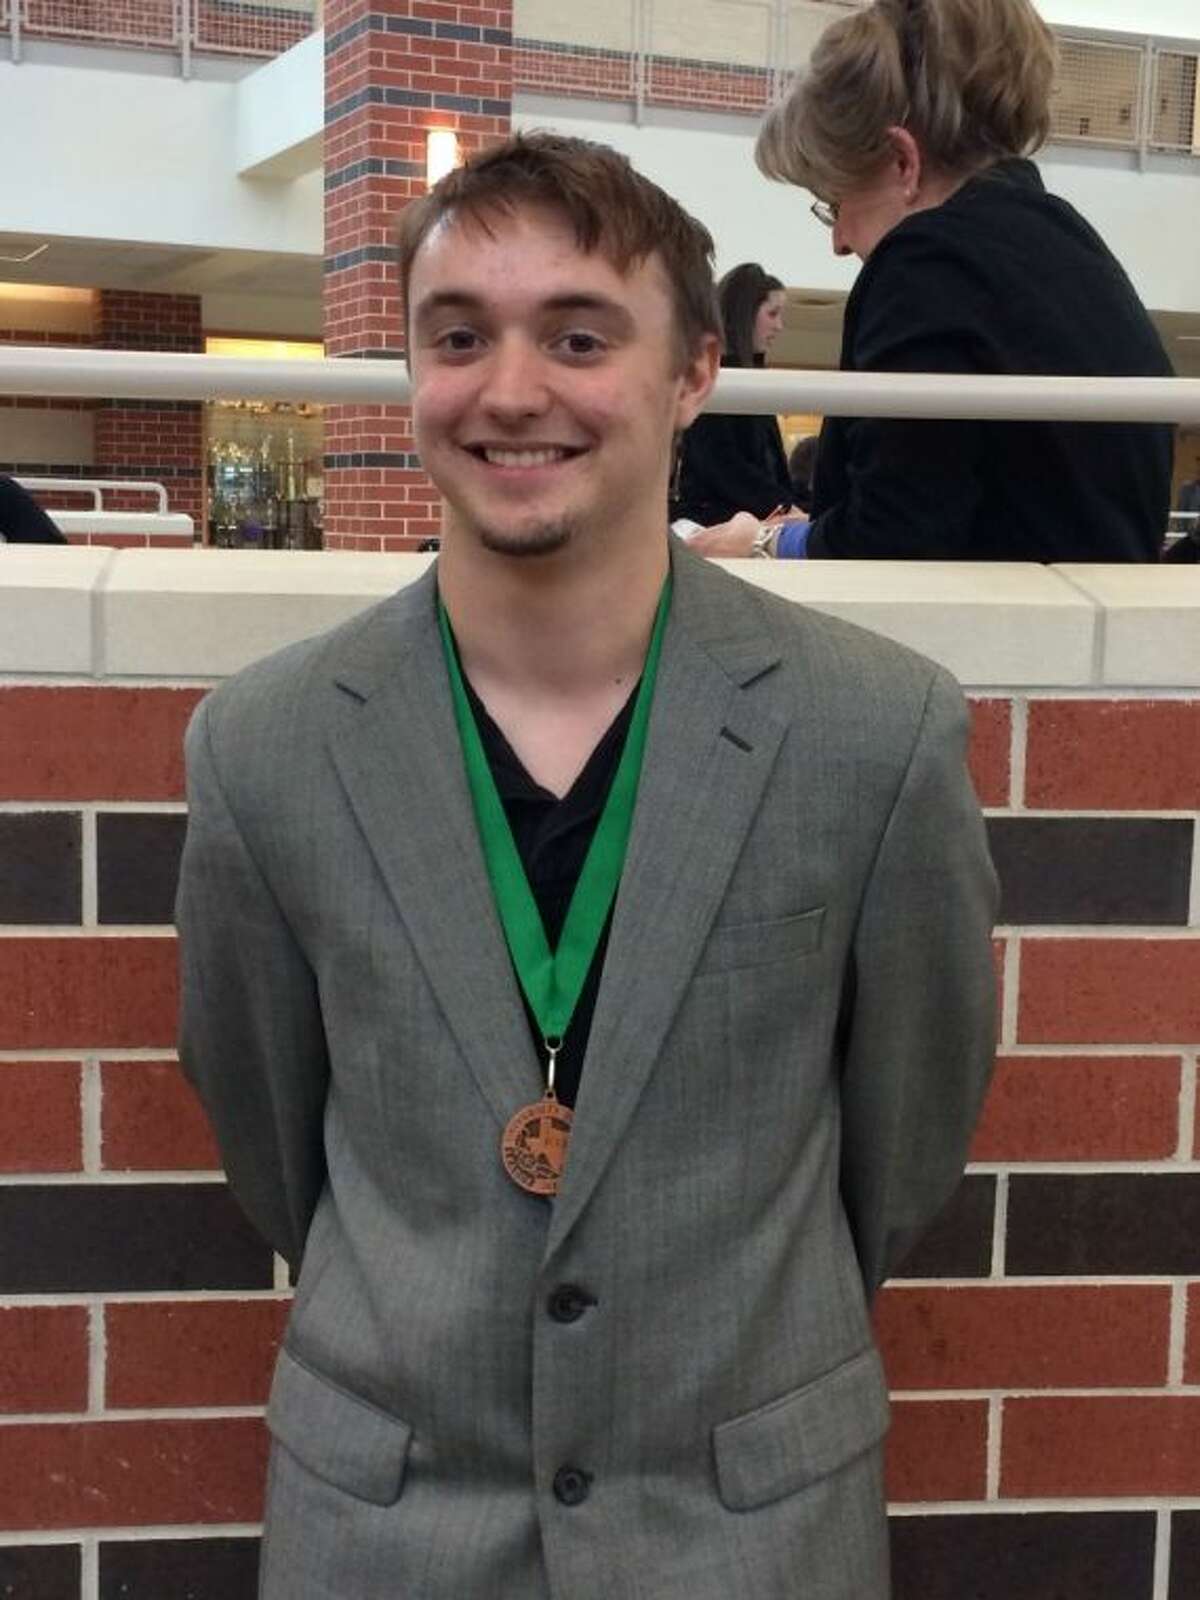 Cleveland High School student Timothy Burleson shows off his sixth-place medal for Prose Interpretation from the Livingston Invitational UIL meet on Feb. 8.